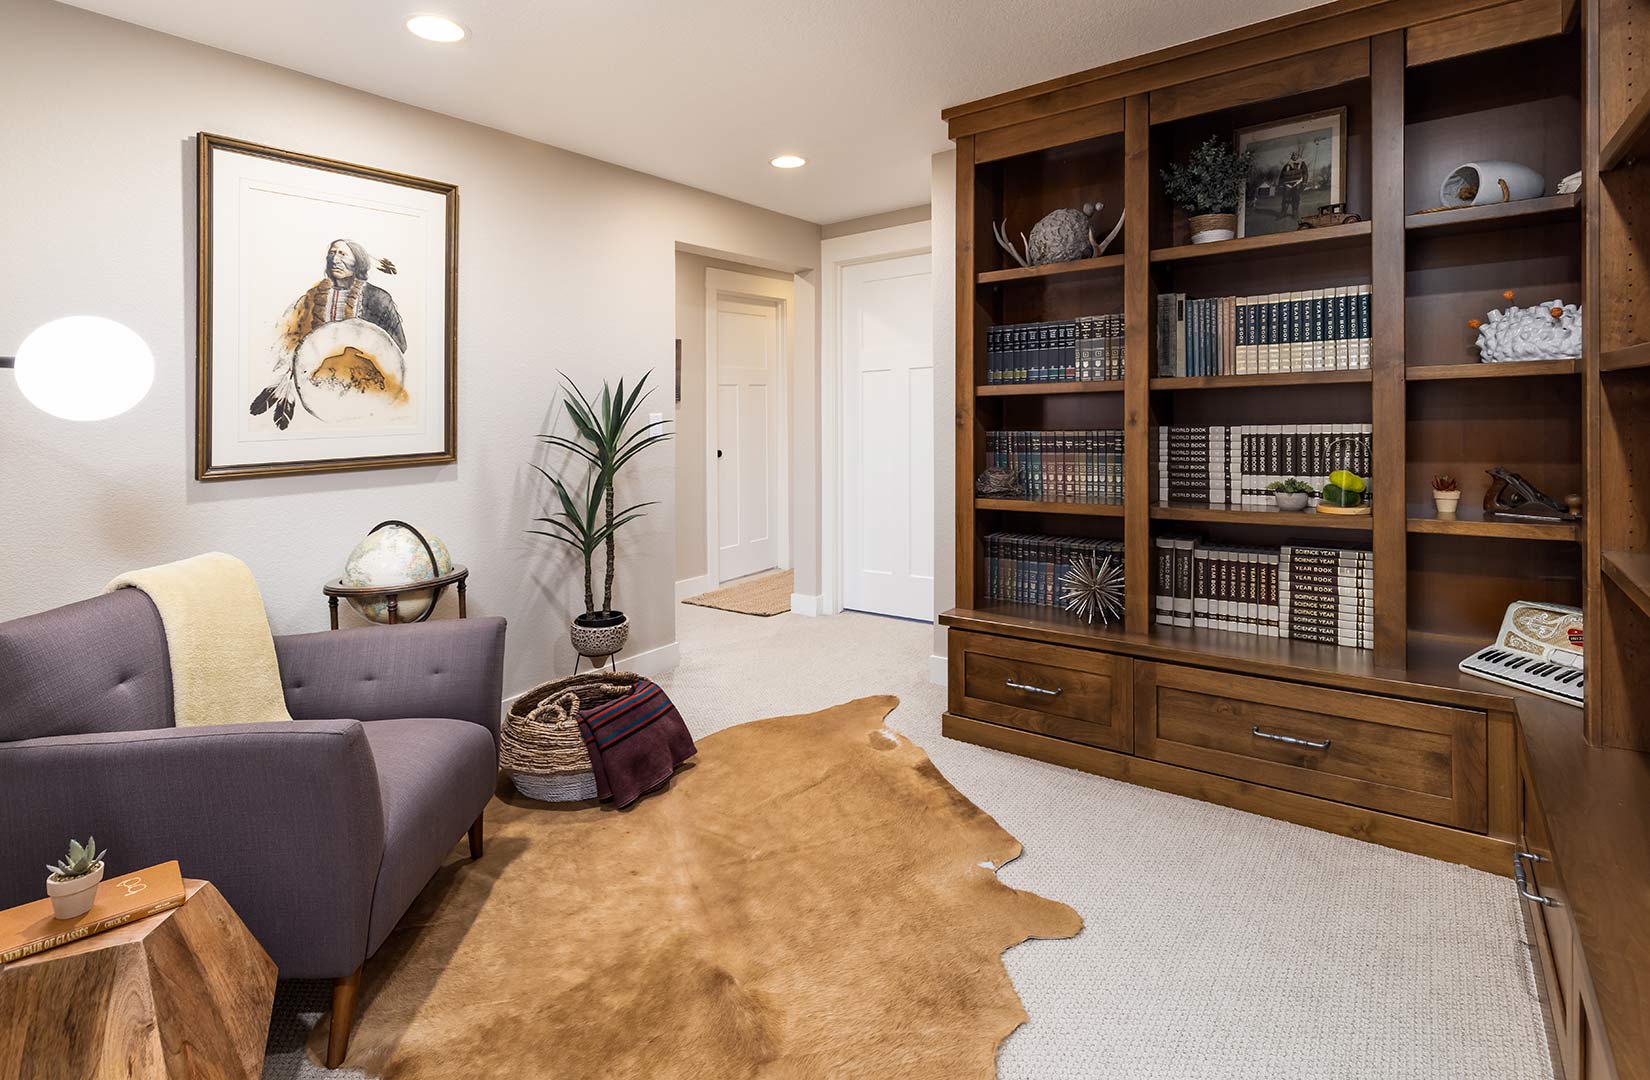 Built in bookcases and a large accent chair with a cow skin rug show the styled library by Freestone Design-Build. 